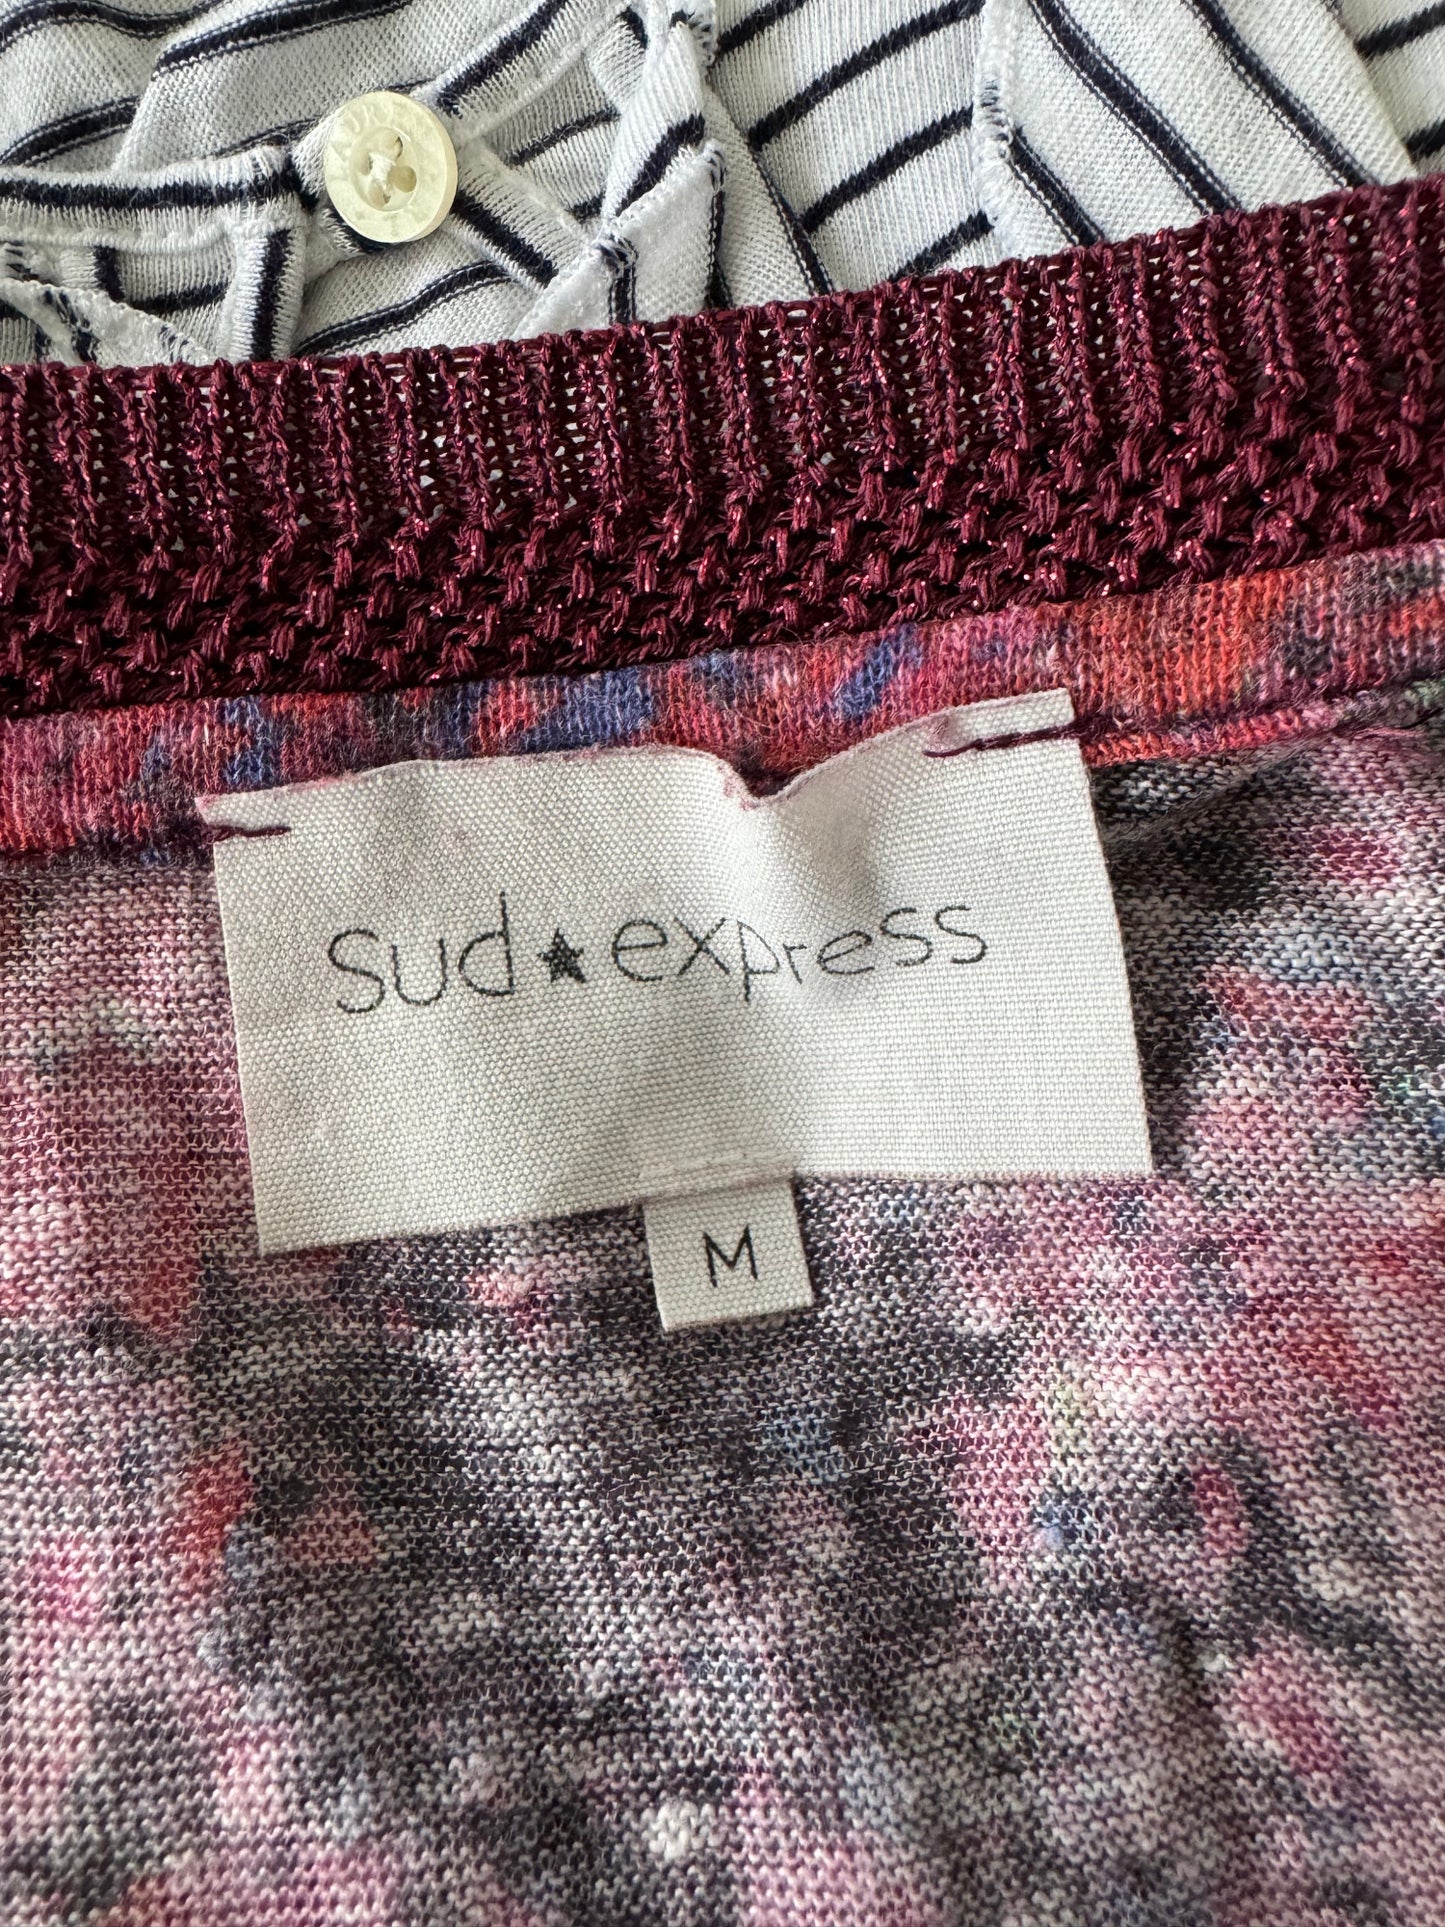 Pull Sud Express